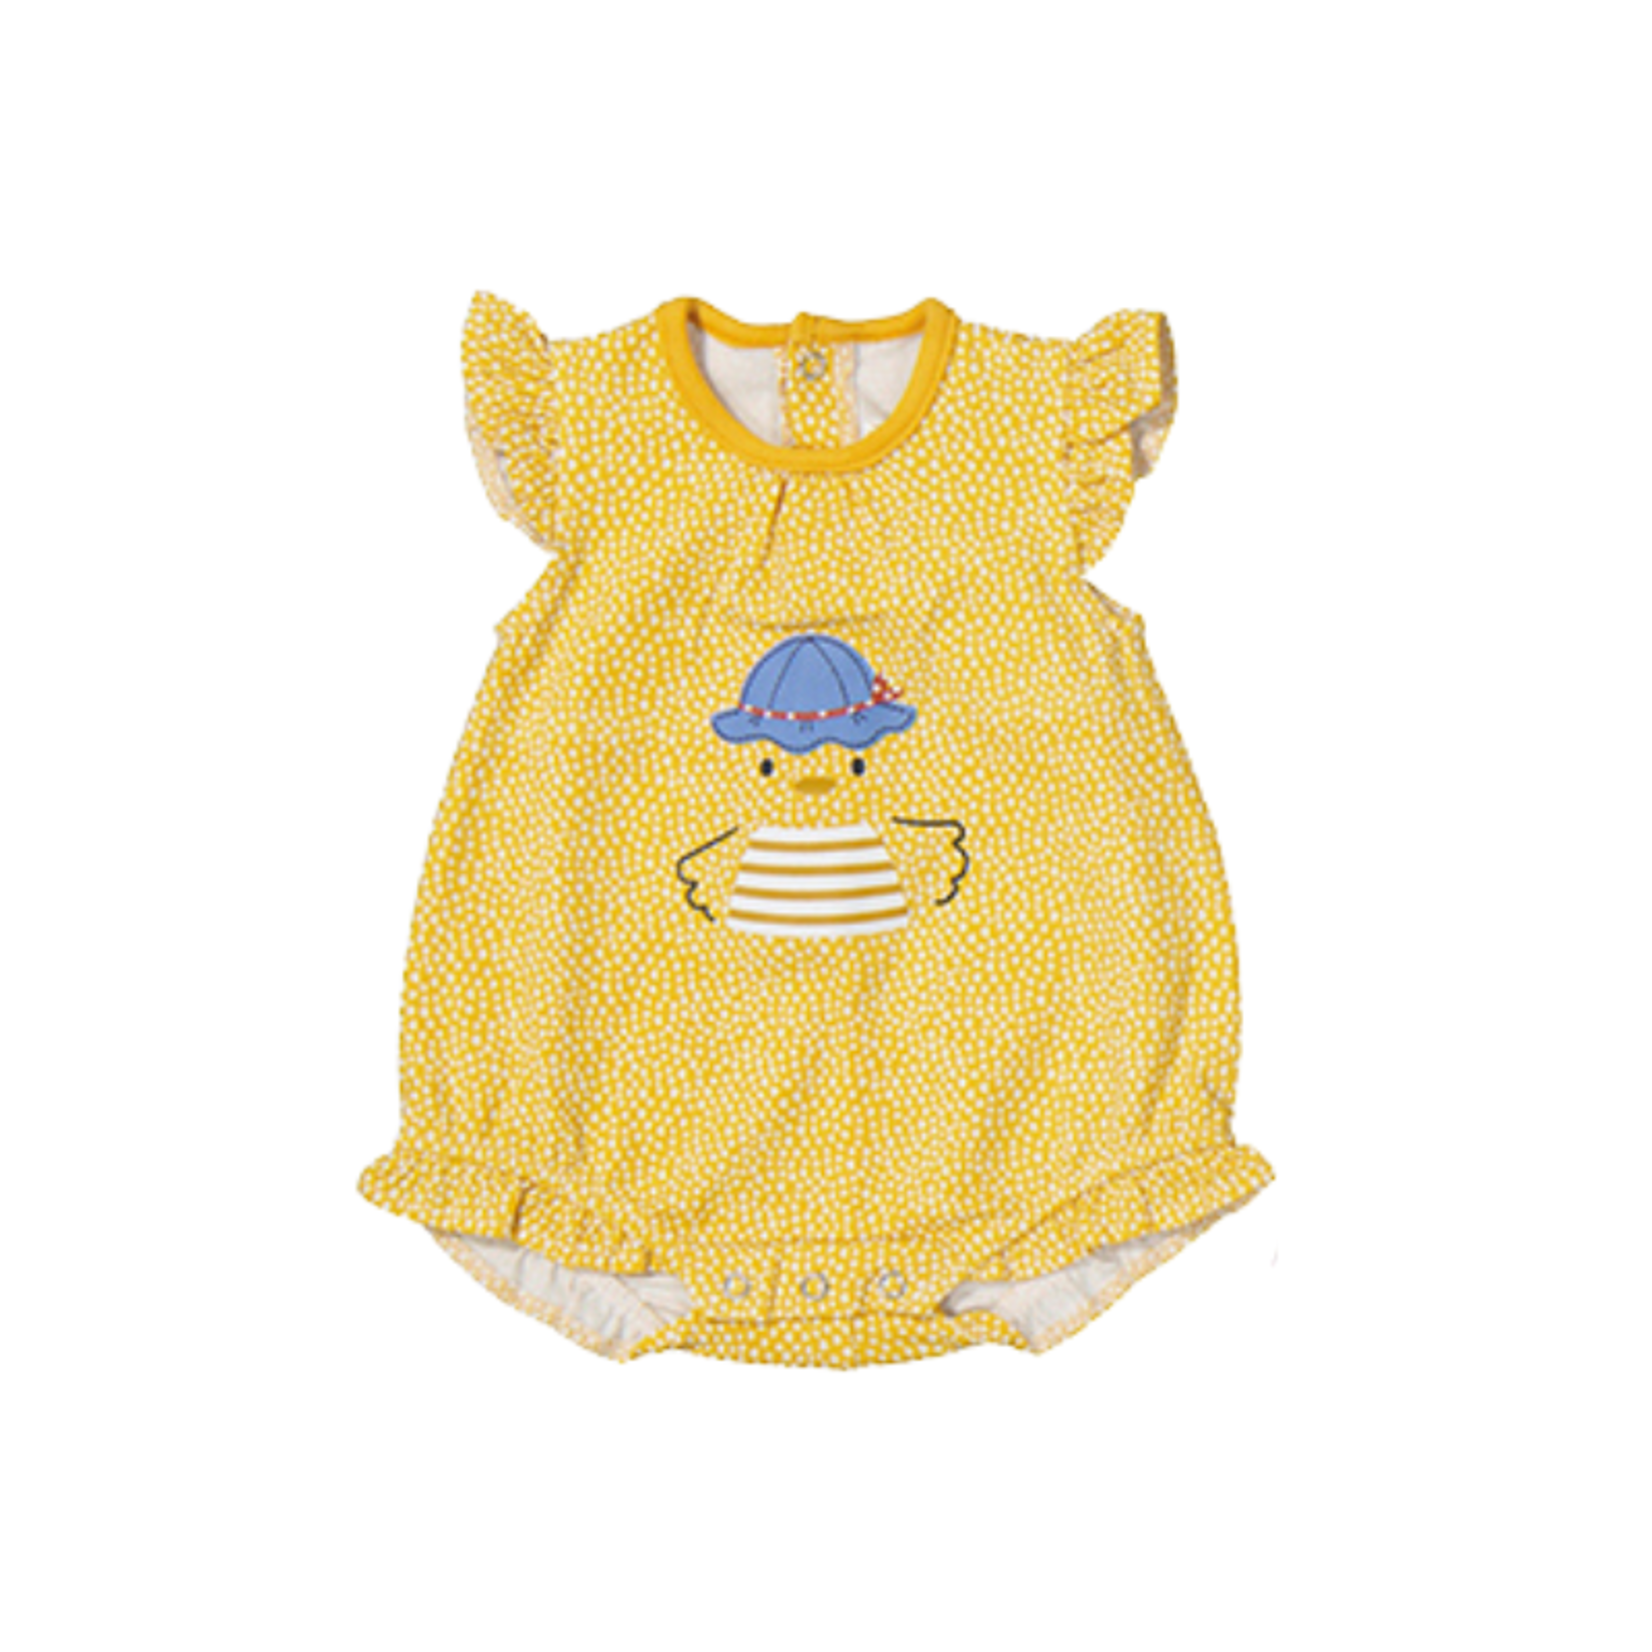 Mayoral Mayoral Romper Hat Ducky Light Yellow